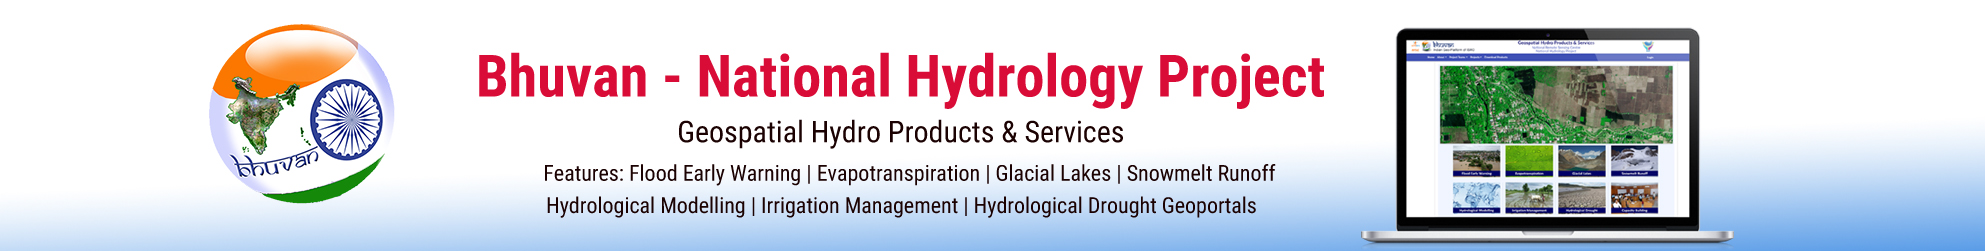 Bhuvan - National Hydrology Project